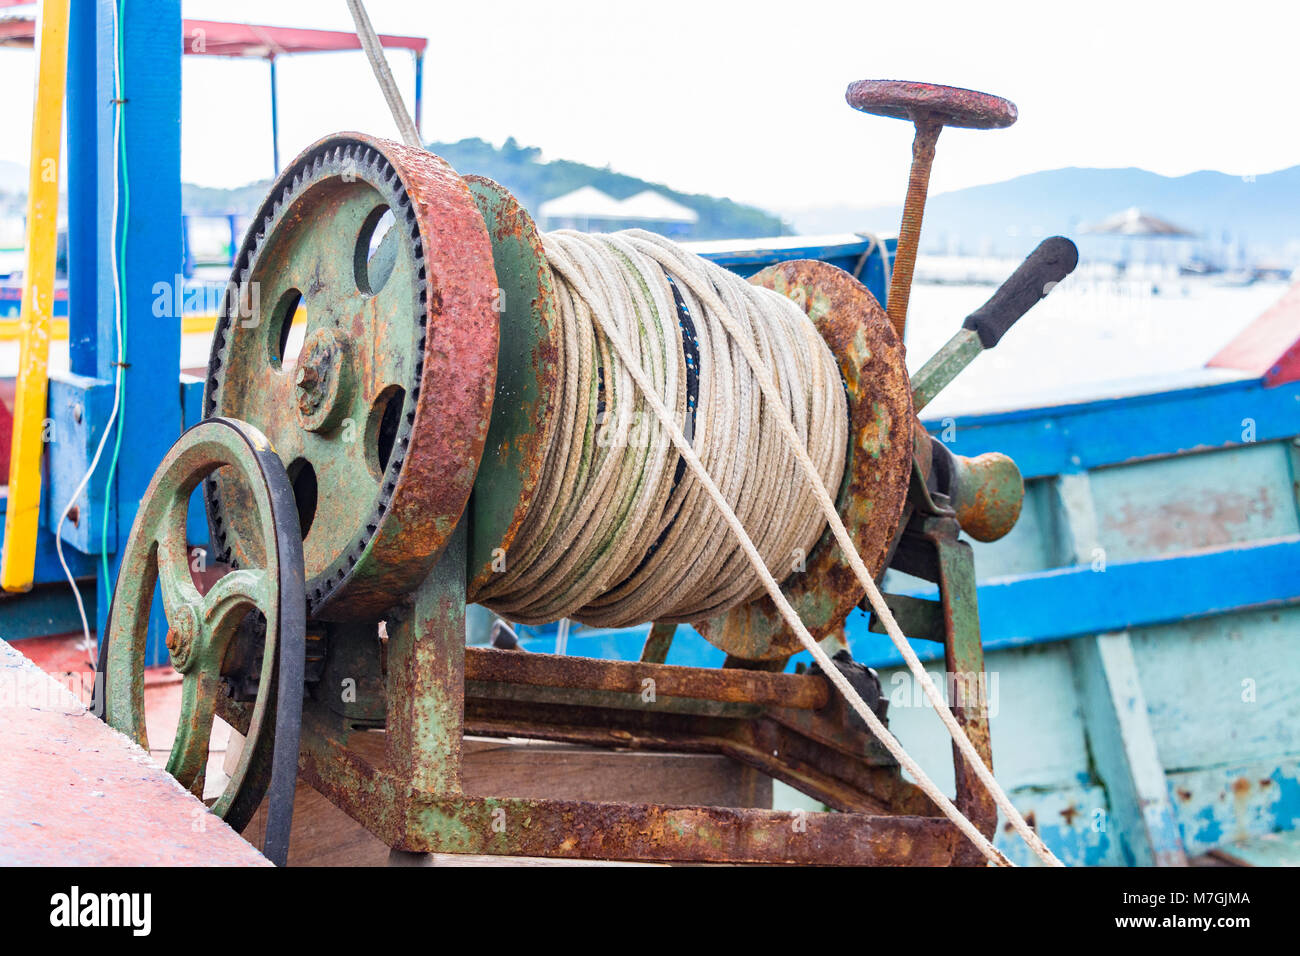 An old manual oxided winch placed on a fishing wooden boat in Porto Belo, Brazil. Stock Photo